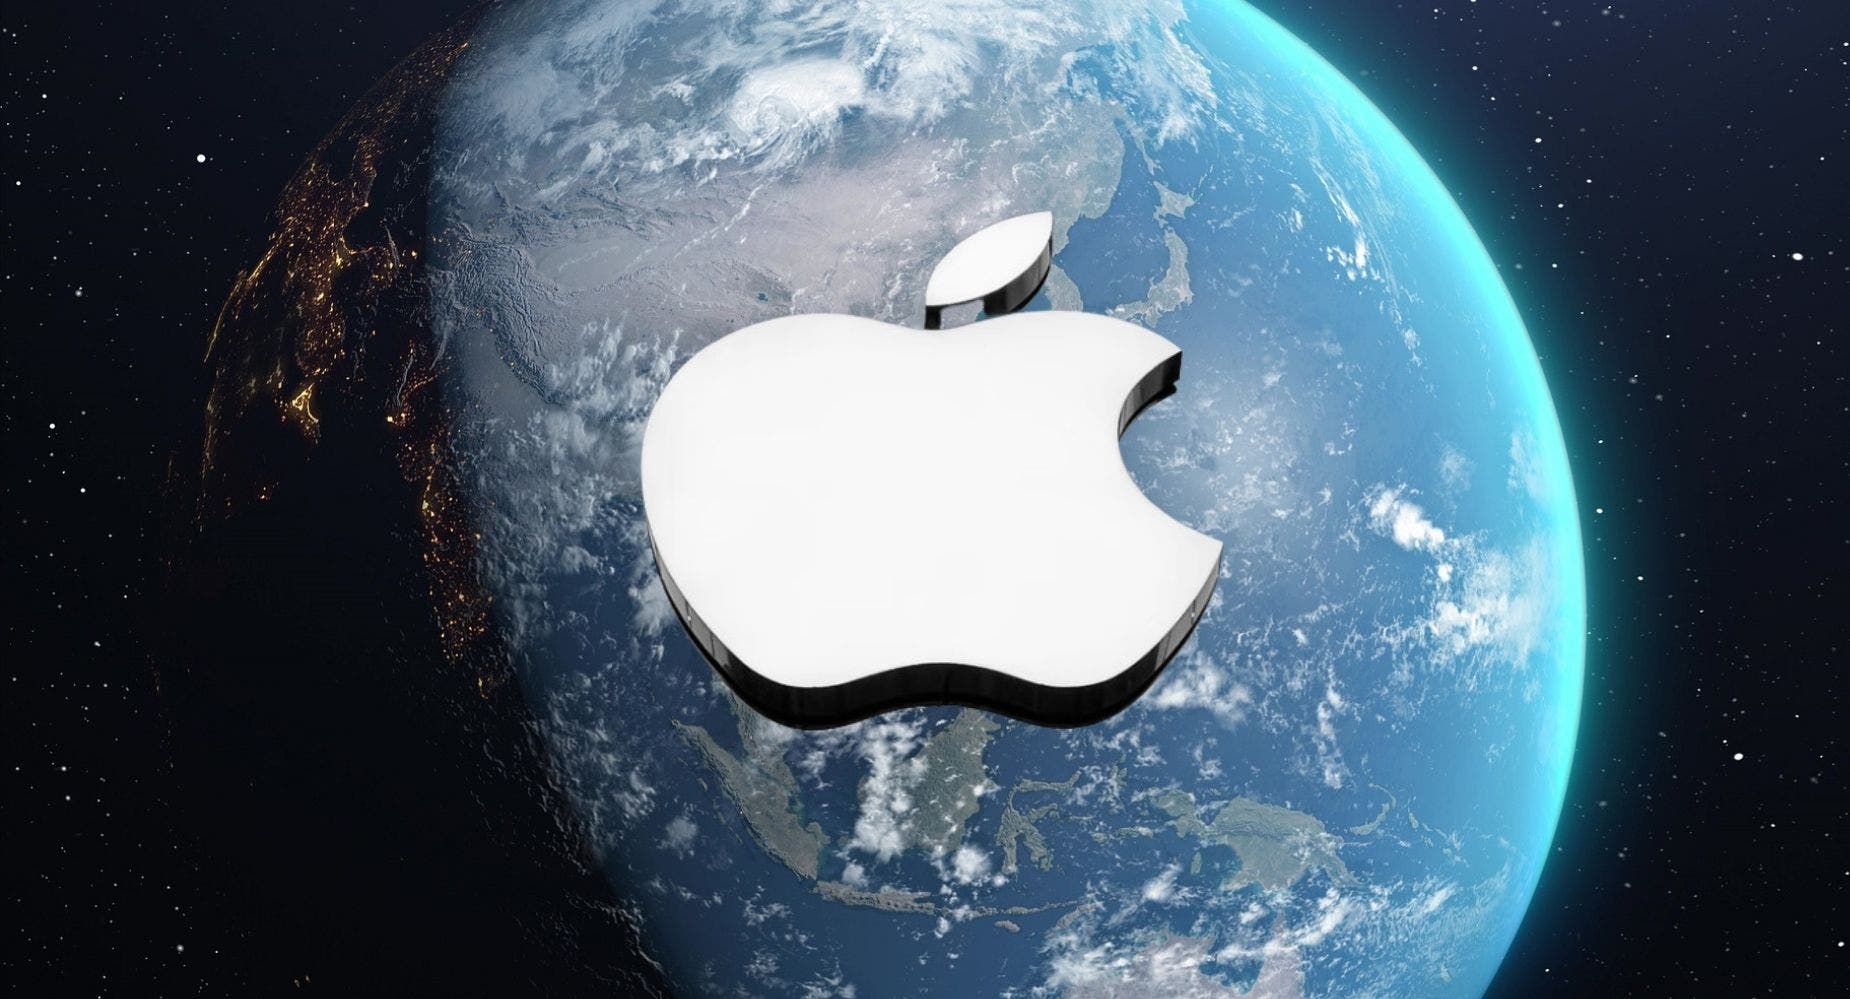 Apple's Challenges Go Beyond Latest Economic Concerns; Why This Analyst Feels Cupertino Can Bounce Fairly Quickly